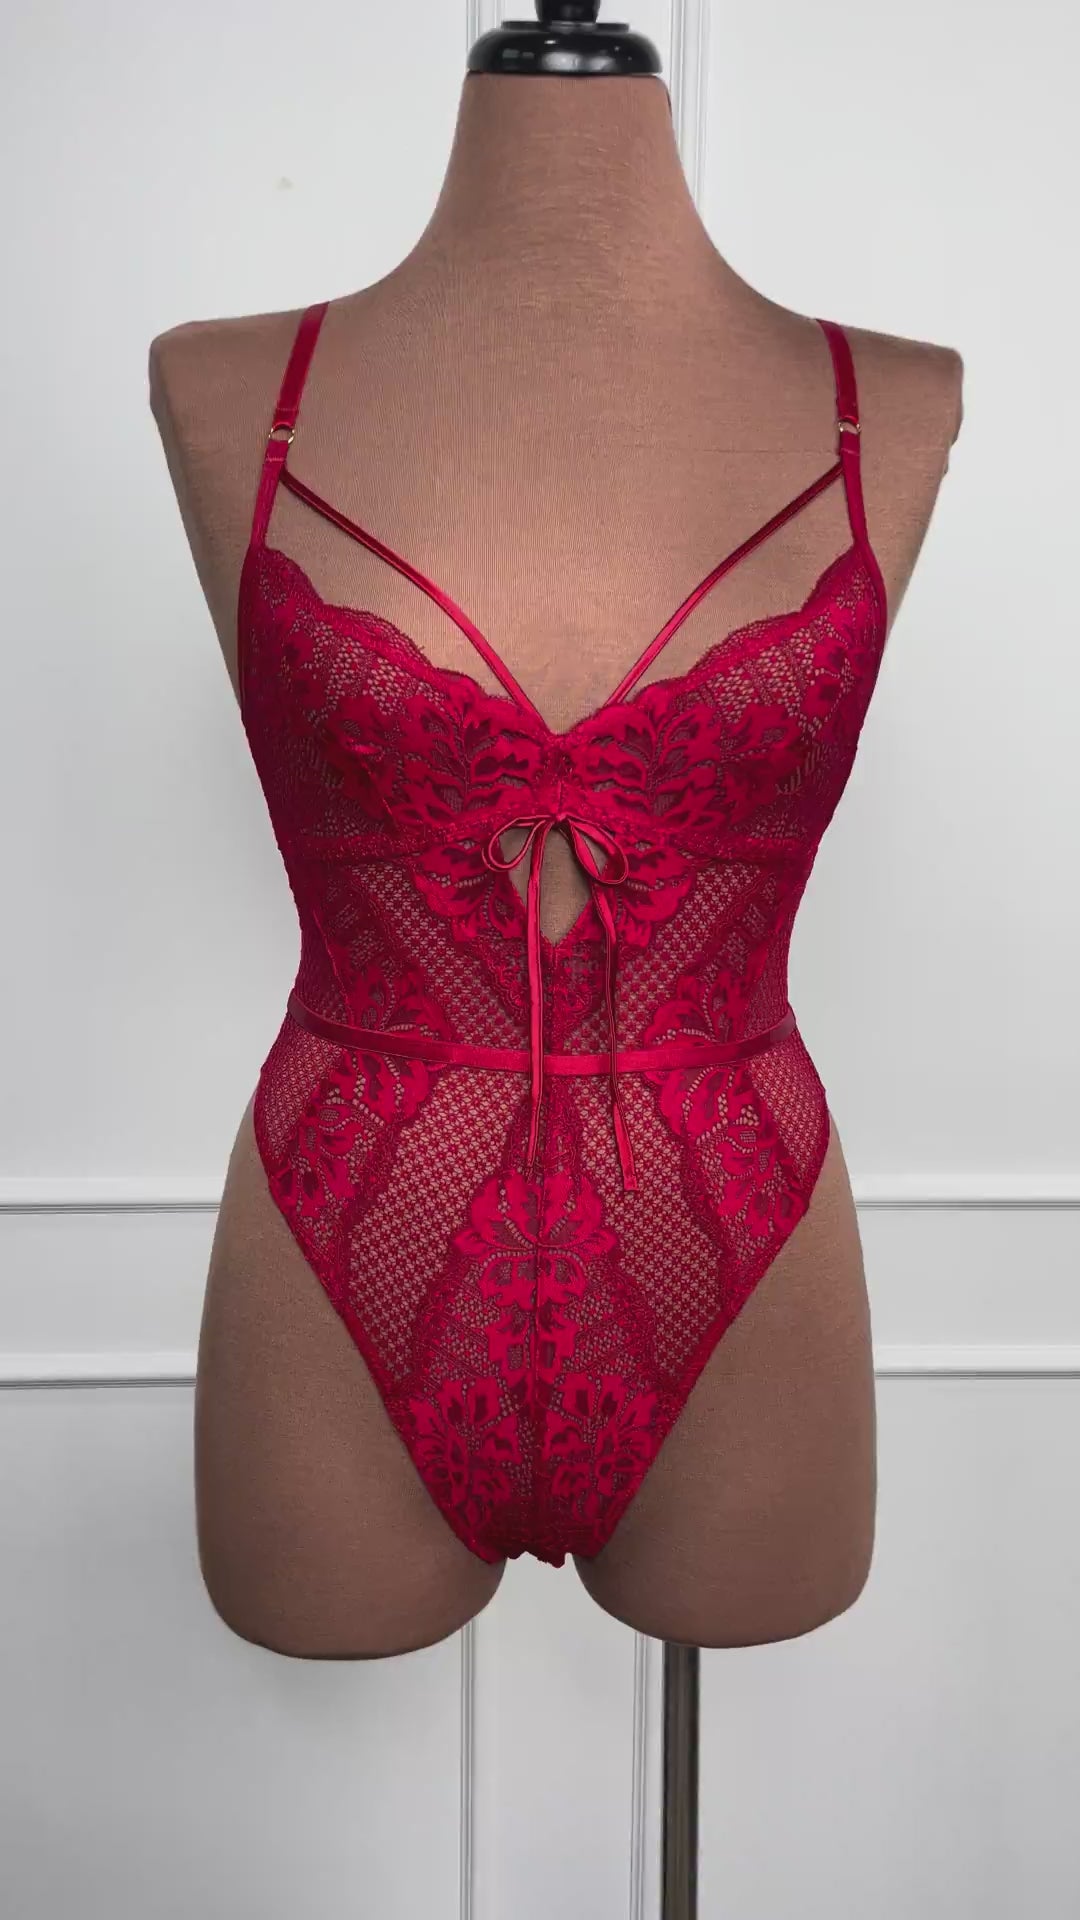 Lacy Caged Crotchless Teddy - Red